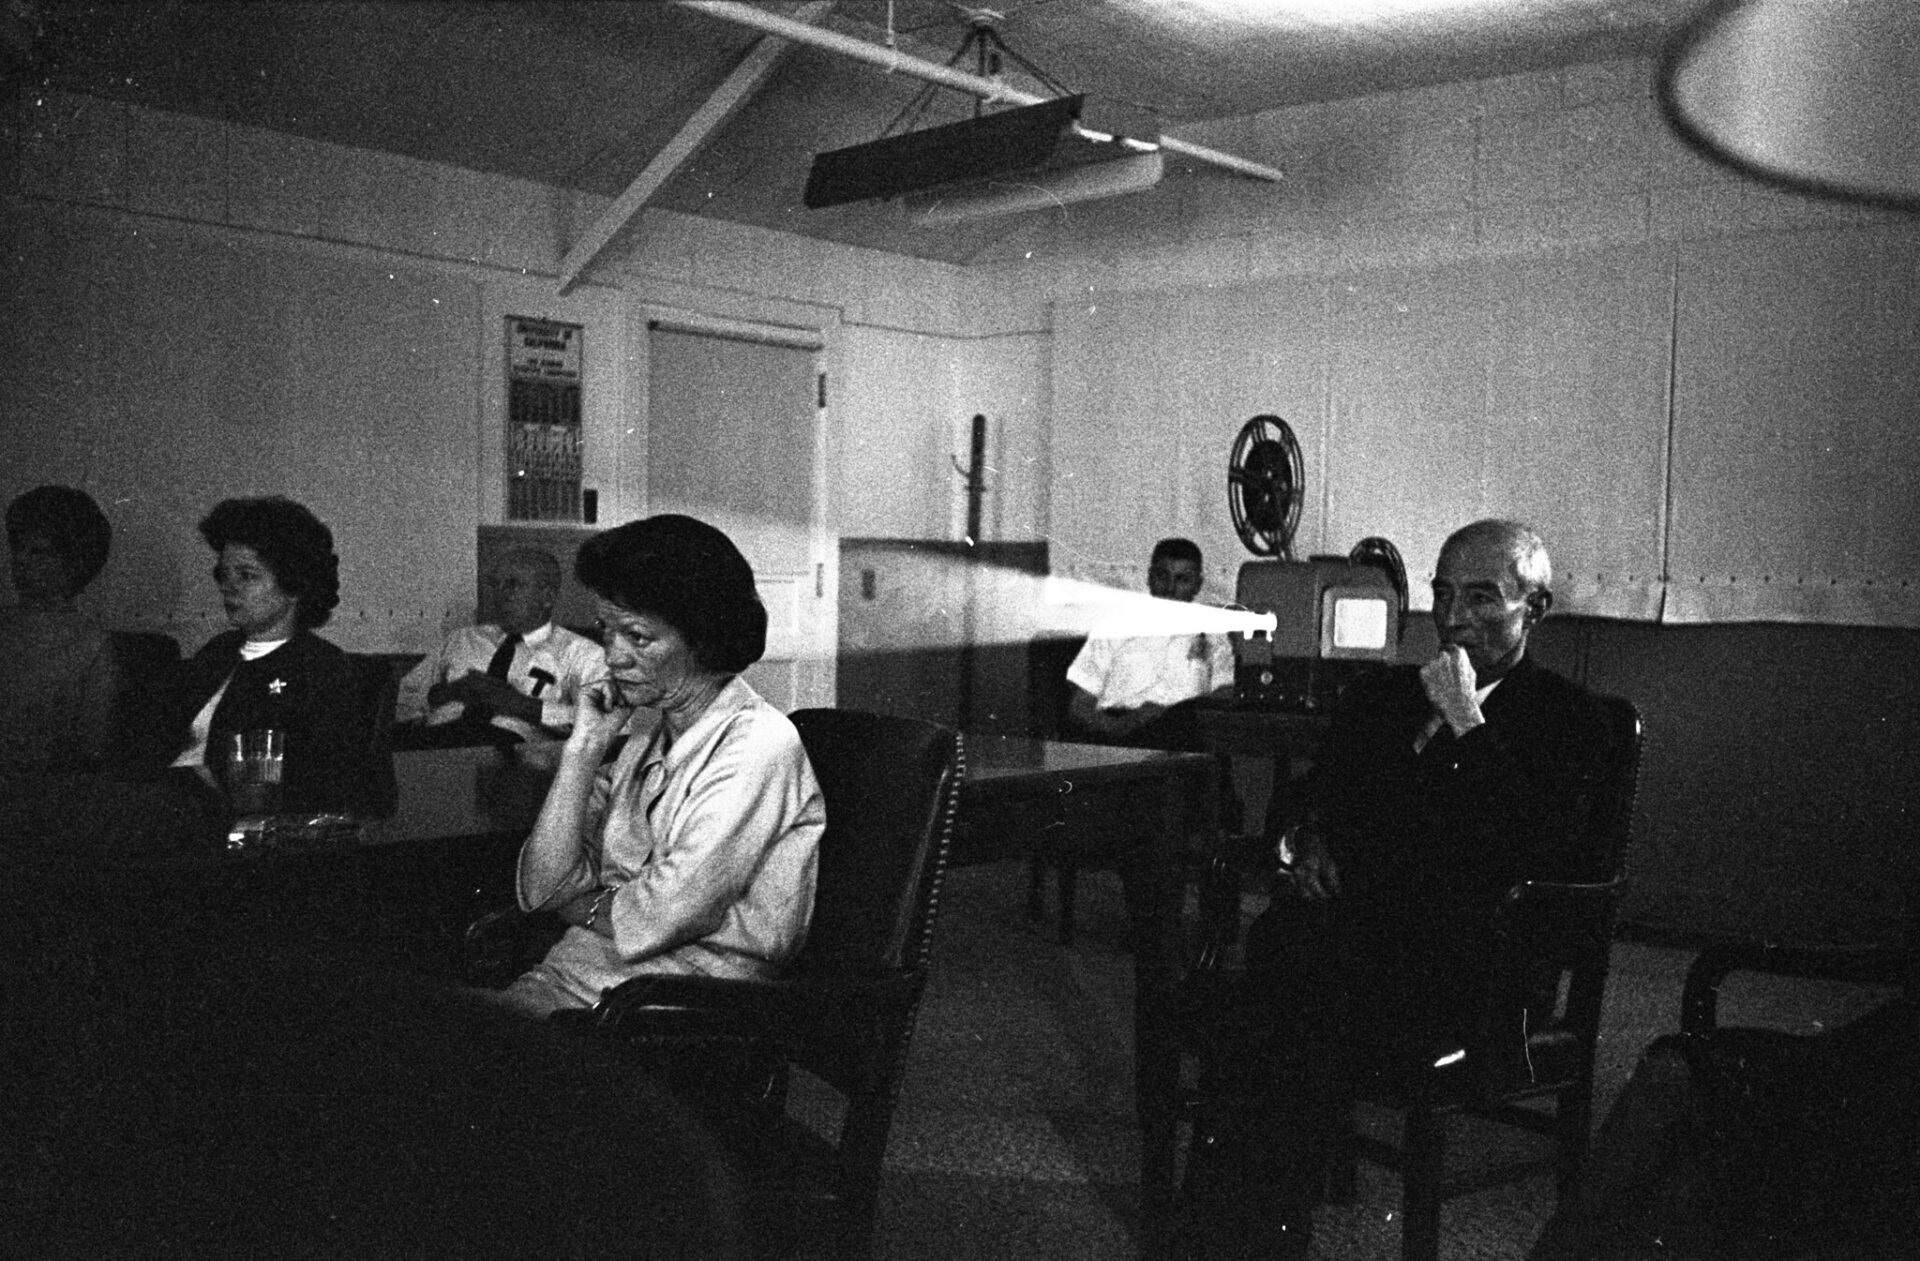 First Director of the Laboratory at Los Alamos (LANL’s original name) J. Robert Oppenheimer (right) watching the documentary, “Ten Seconds that Shook the World” with his wife, Kitty Oppenheimer (center) during their visit to the Lab in May 1964. May 18, 1964 LA-UR-23-23467 Image Number: PUB 5829-117; 21-00005366